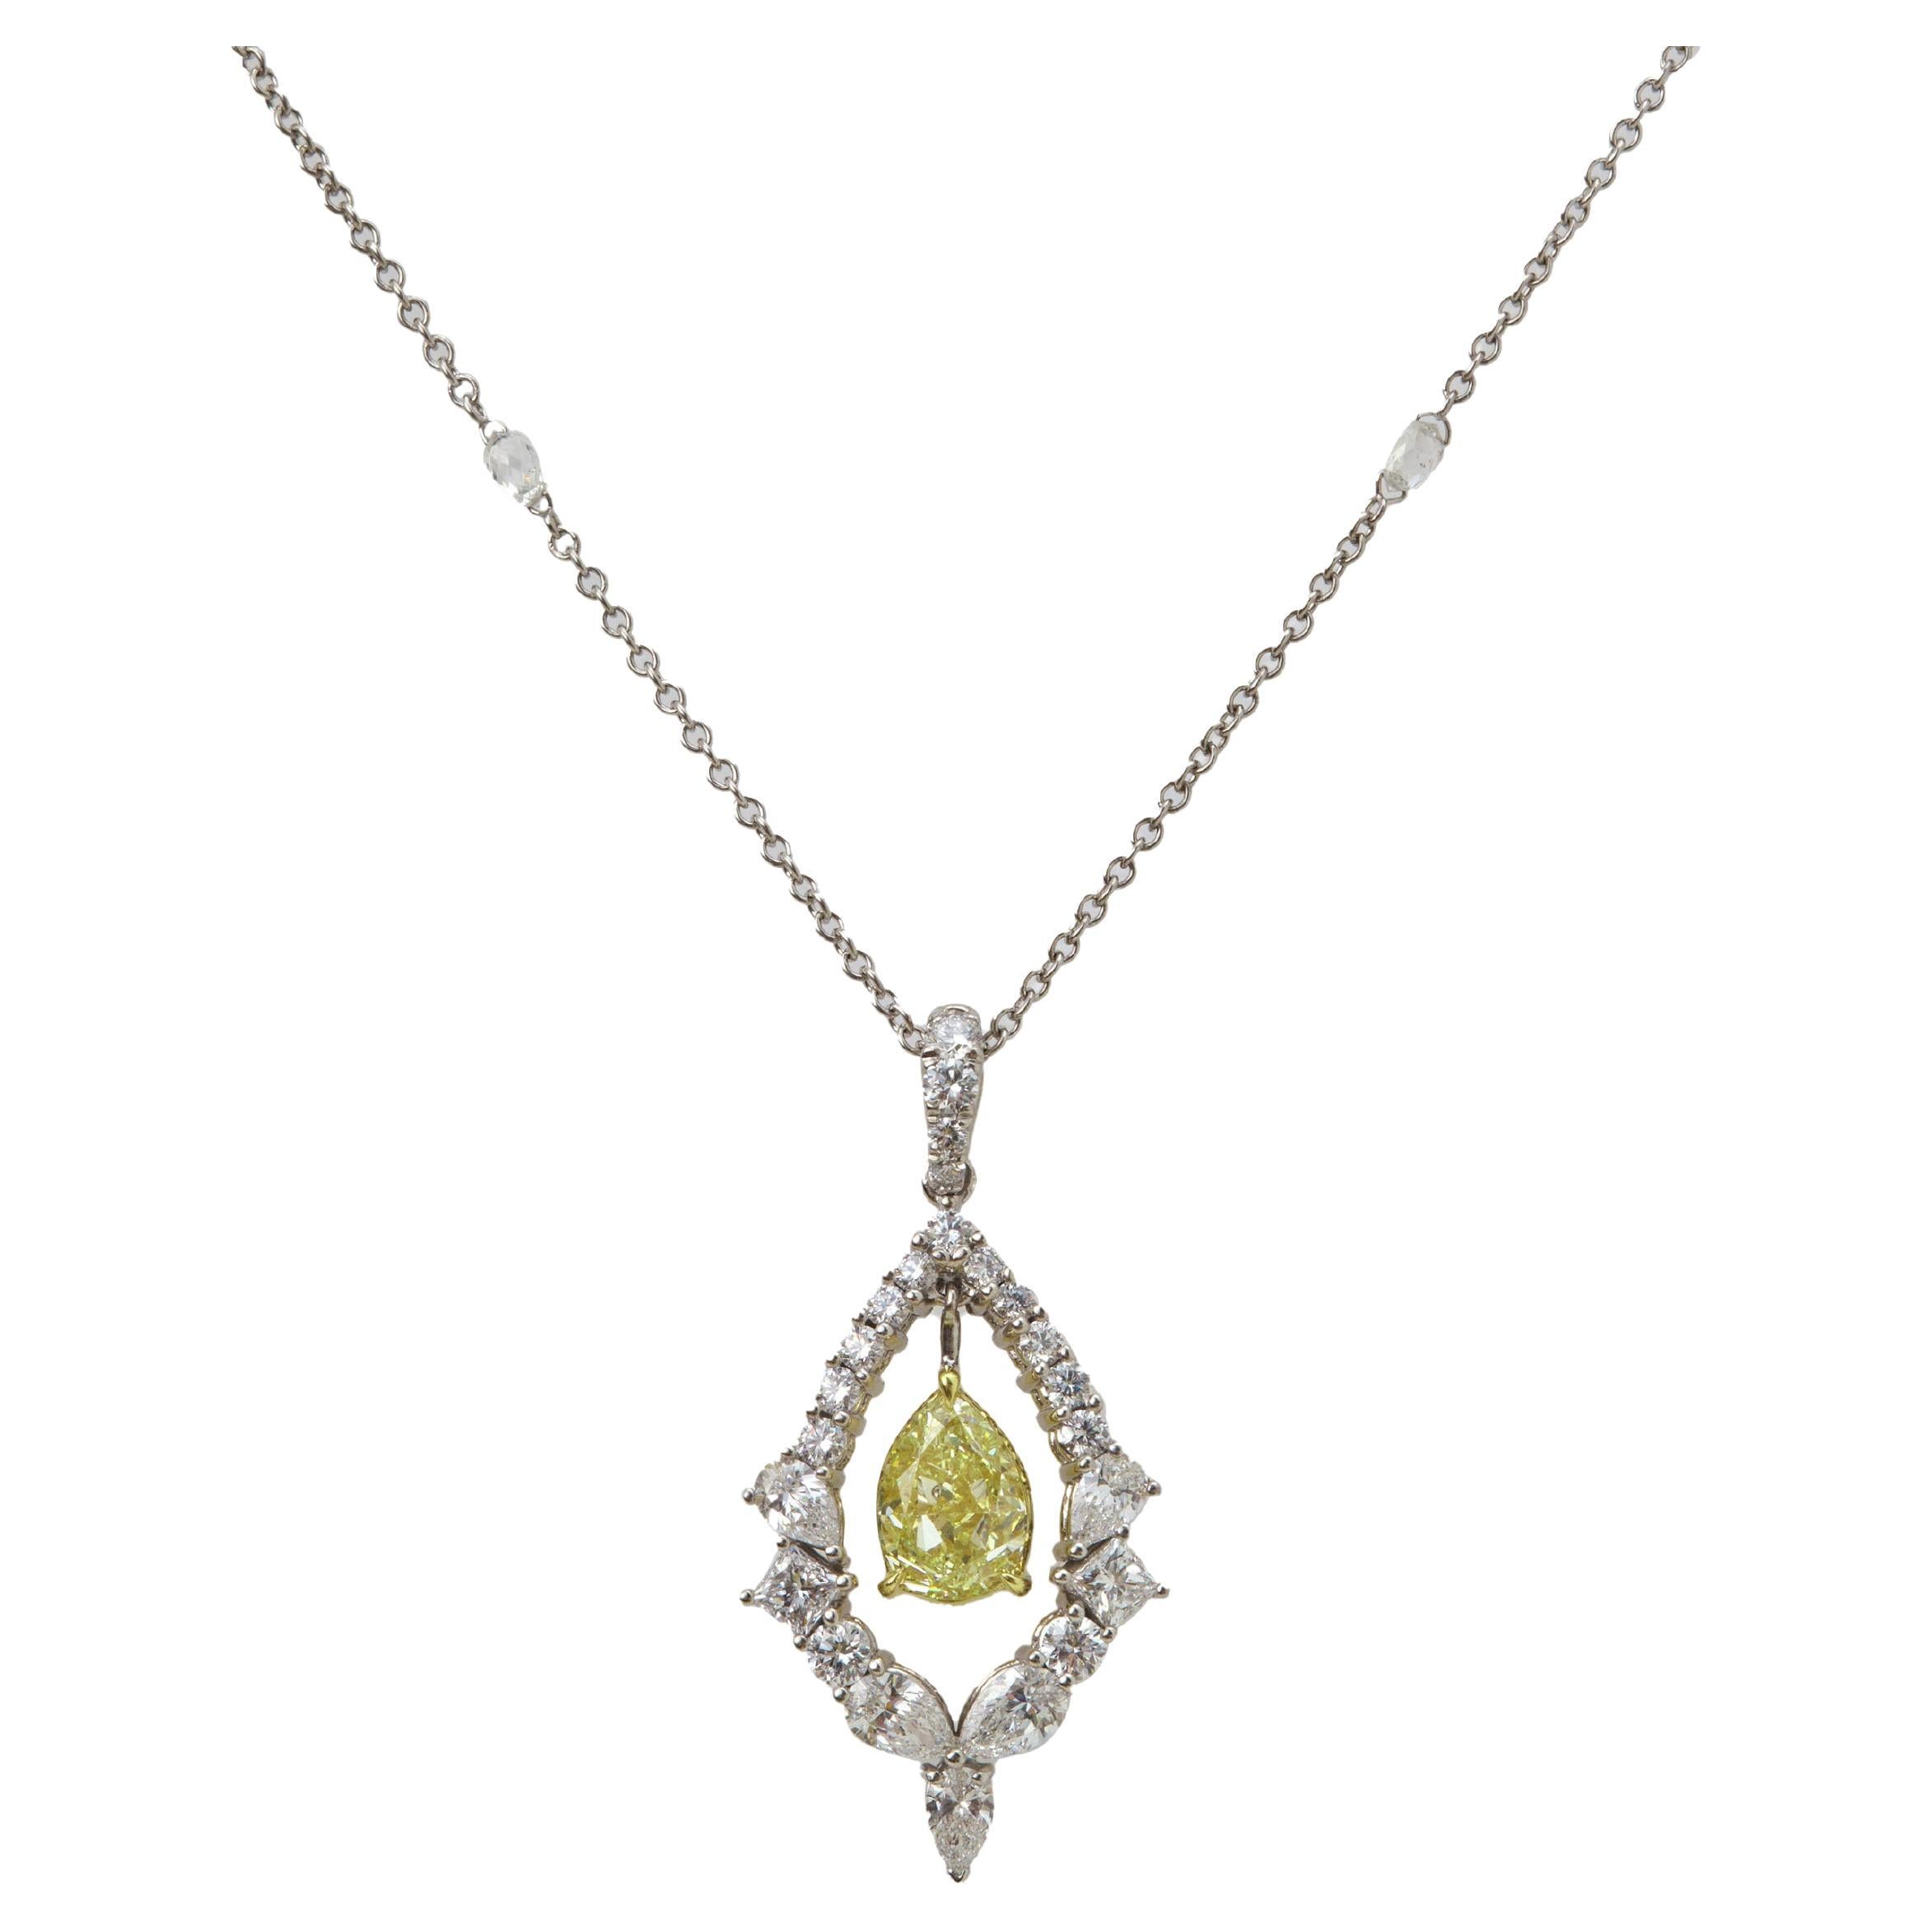 6.93 Carat Fancy Yellow and White Diamond  Necklace 18K White Gold GIA Certified